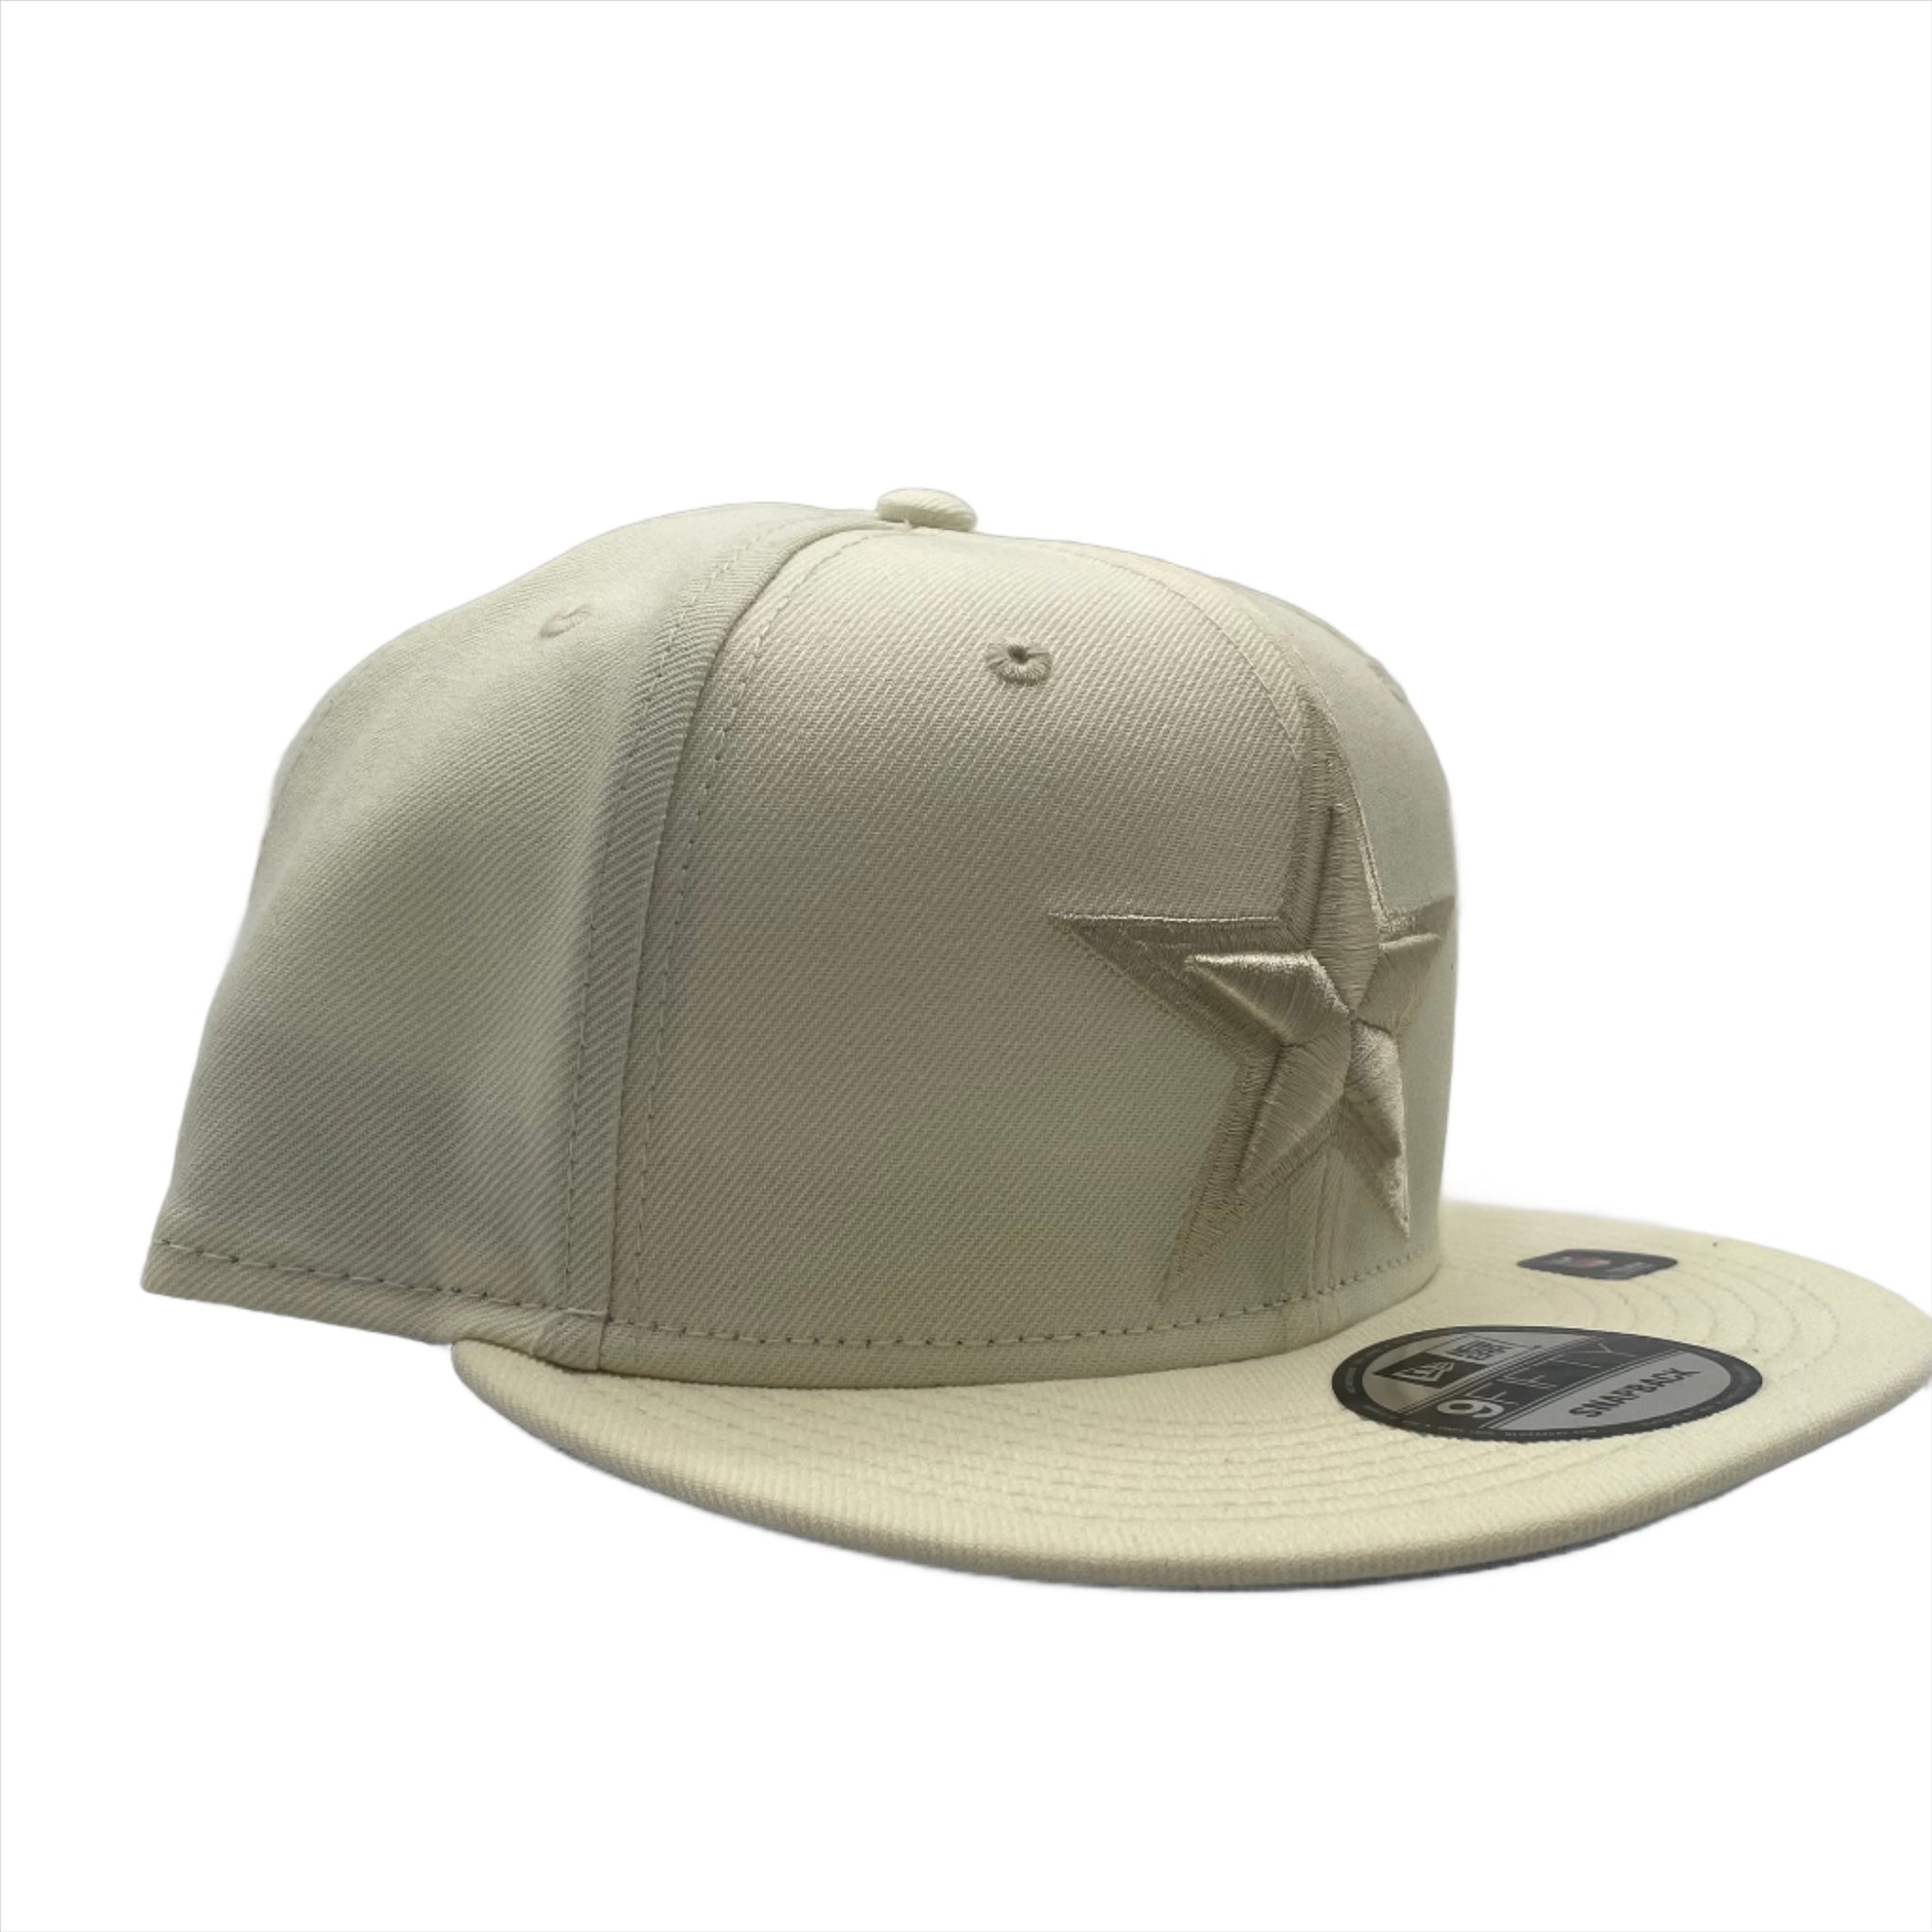 Men's New Era Red Dallas Cowboys Color Pack 9FIFTY Snapback Hat